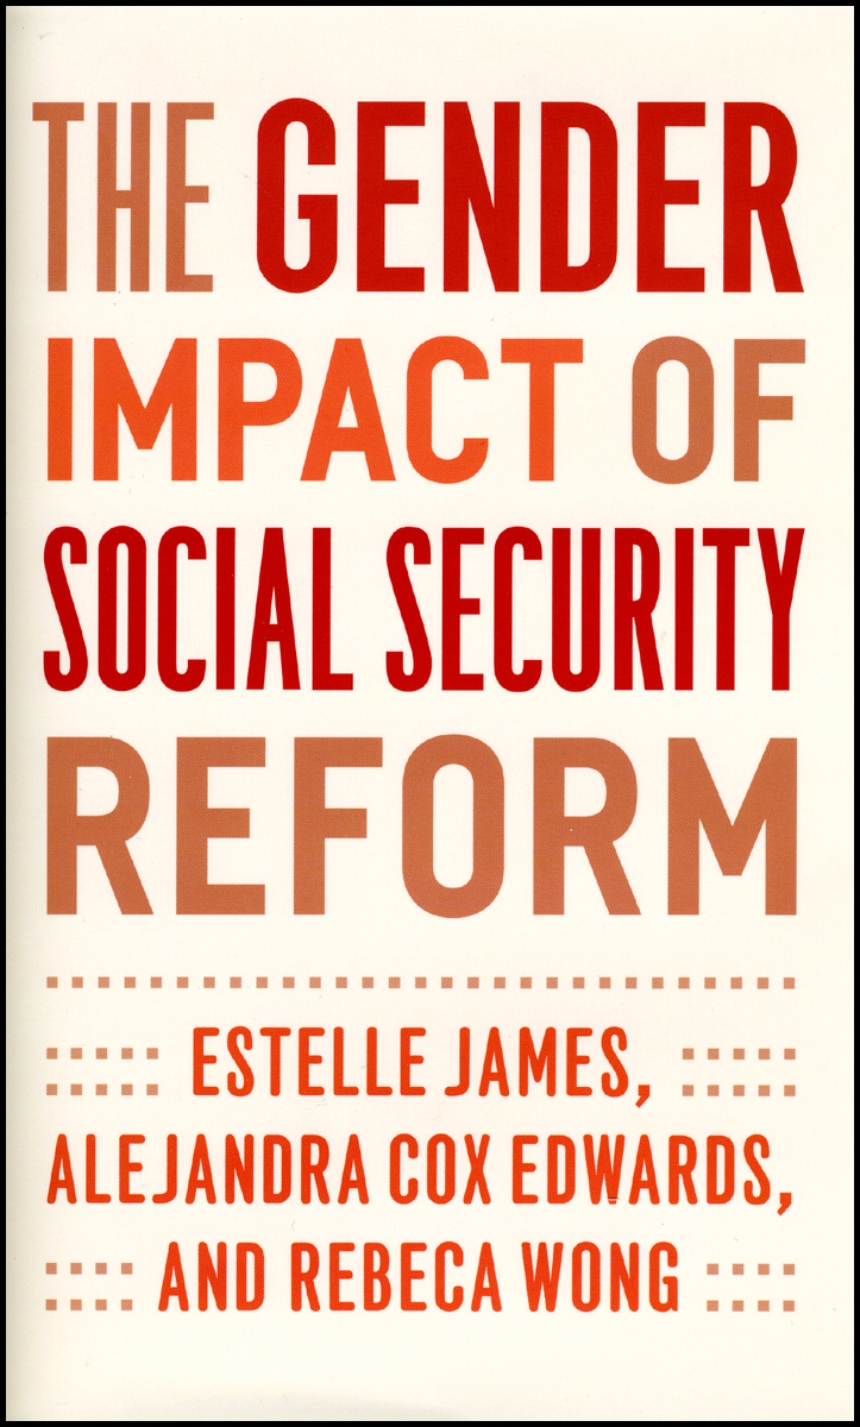 The Gender Impact of Social Security Reform